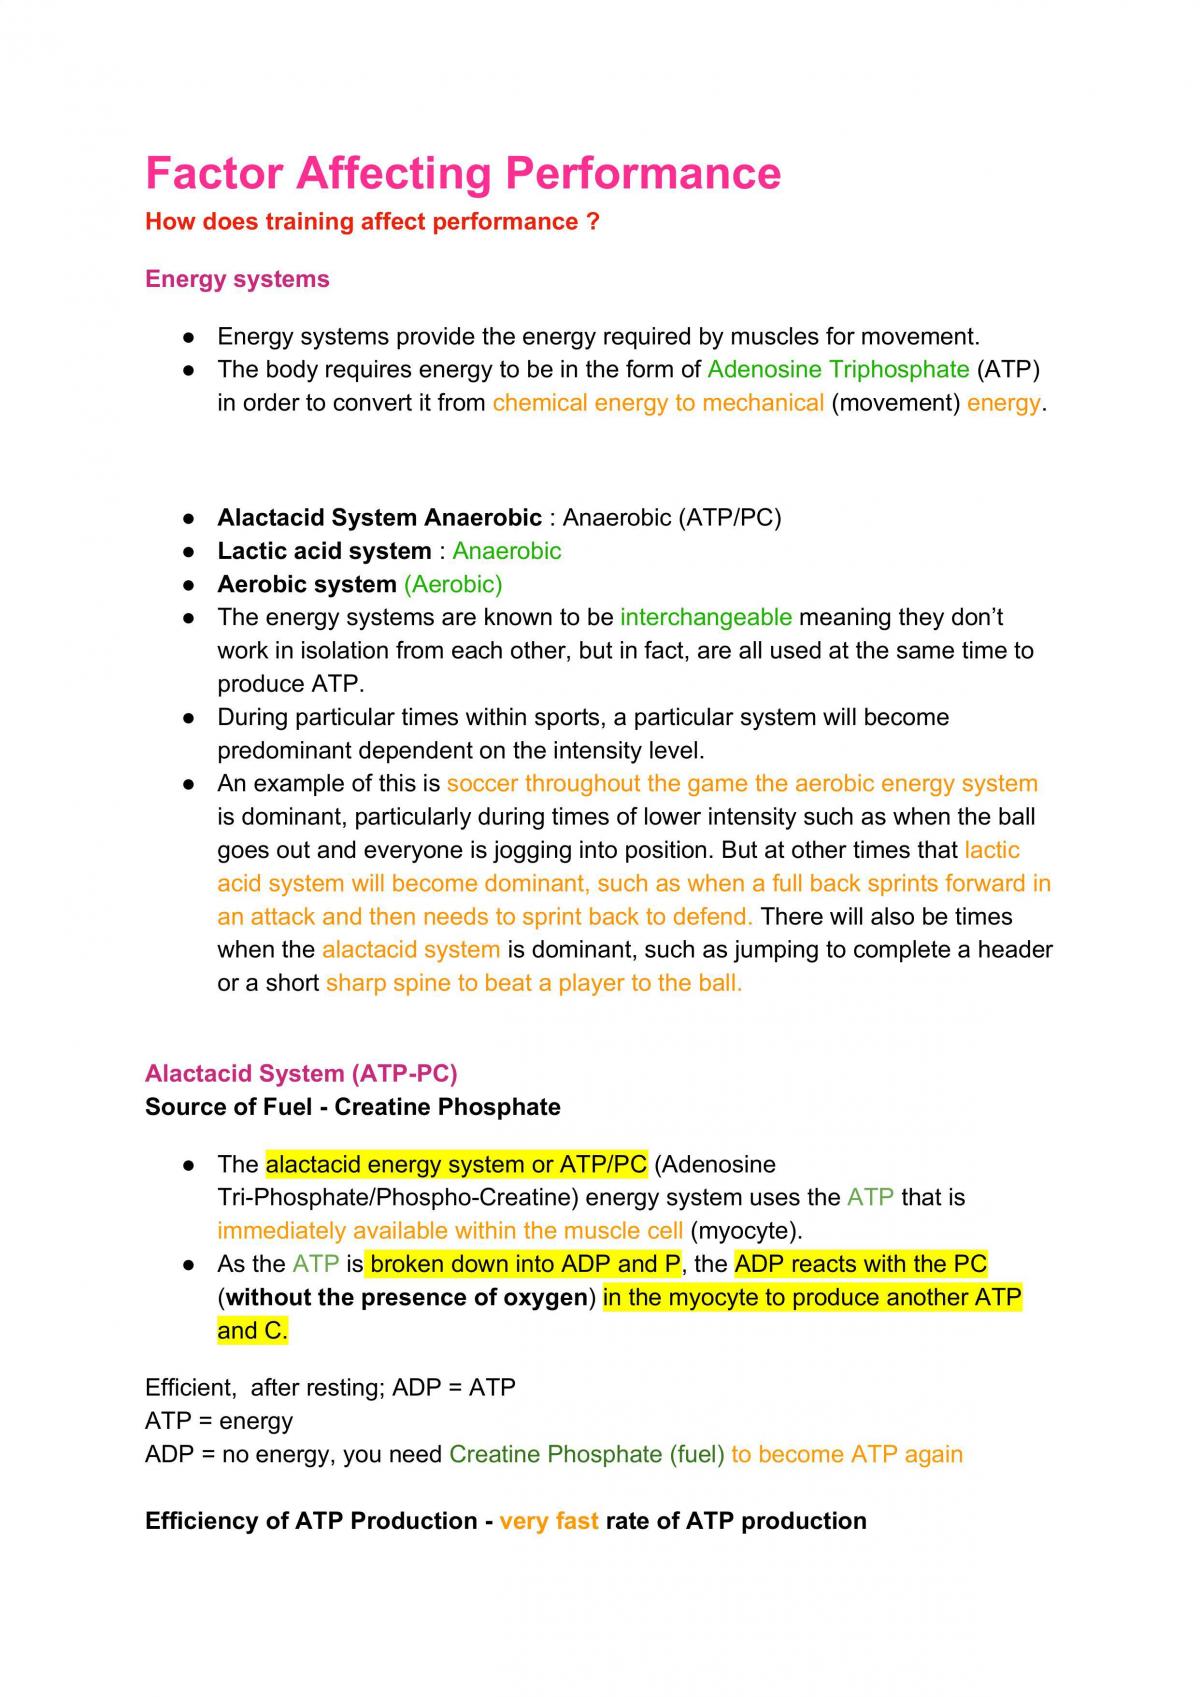 PDHPE Factors Affecting Performance Study Notes  - Page 1